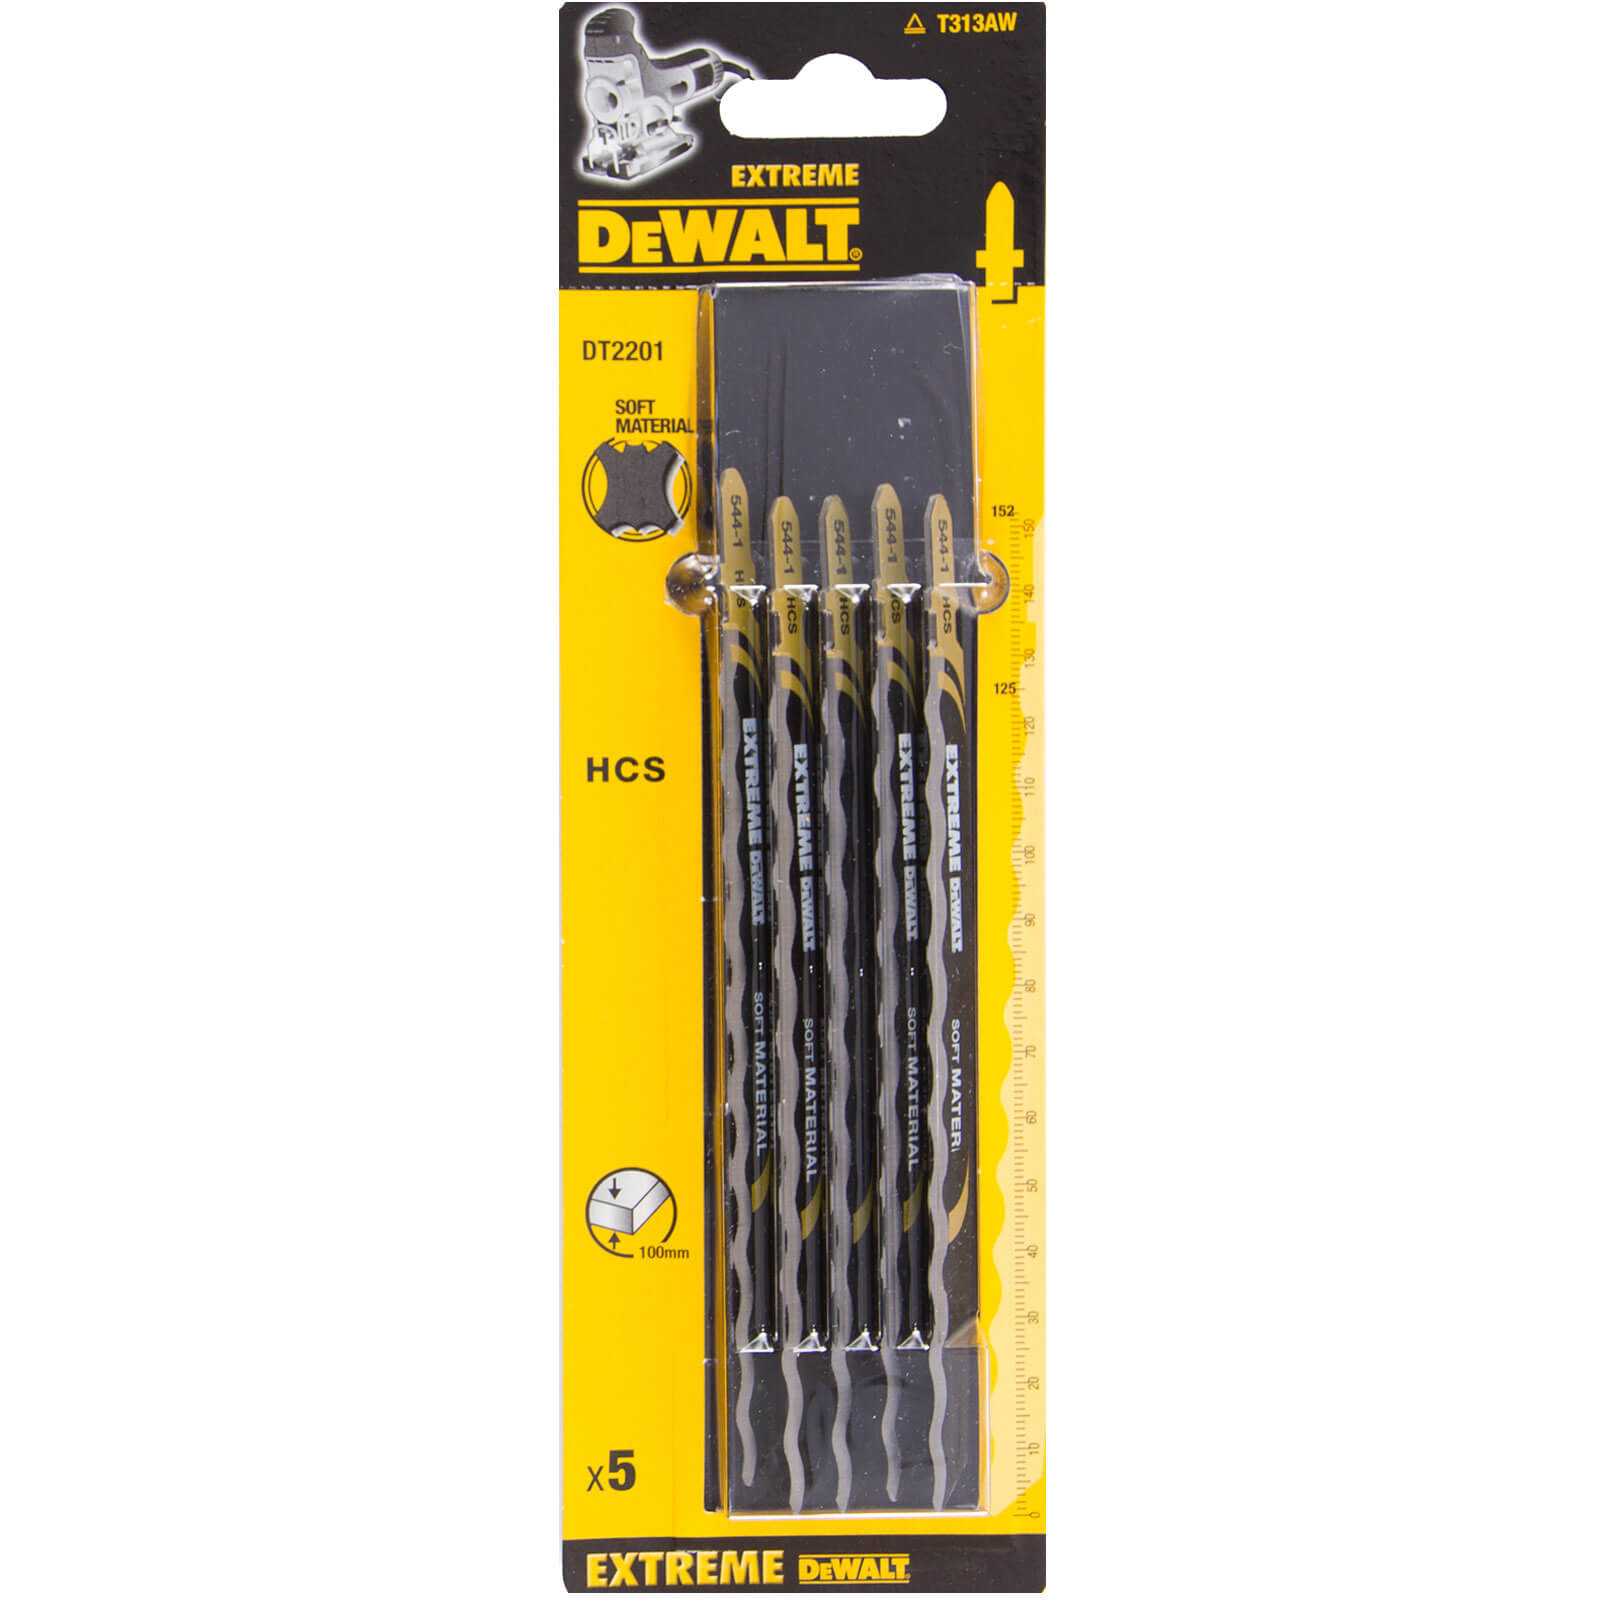 Photos - Power Tool Accessory DeWALT T313AW Soft Material Cutting Jigsaw Blades Pack of 5 DT2201 